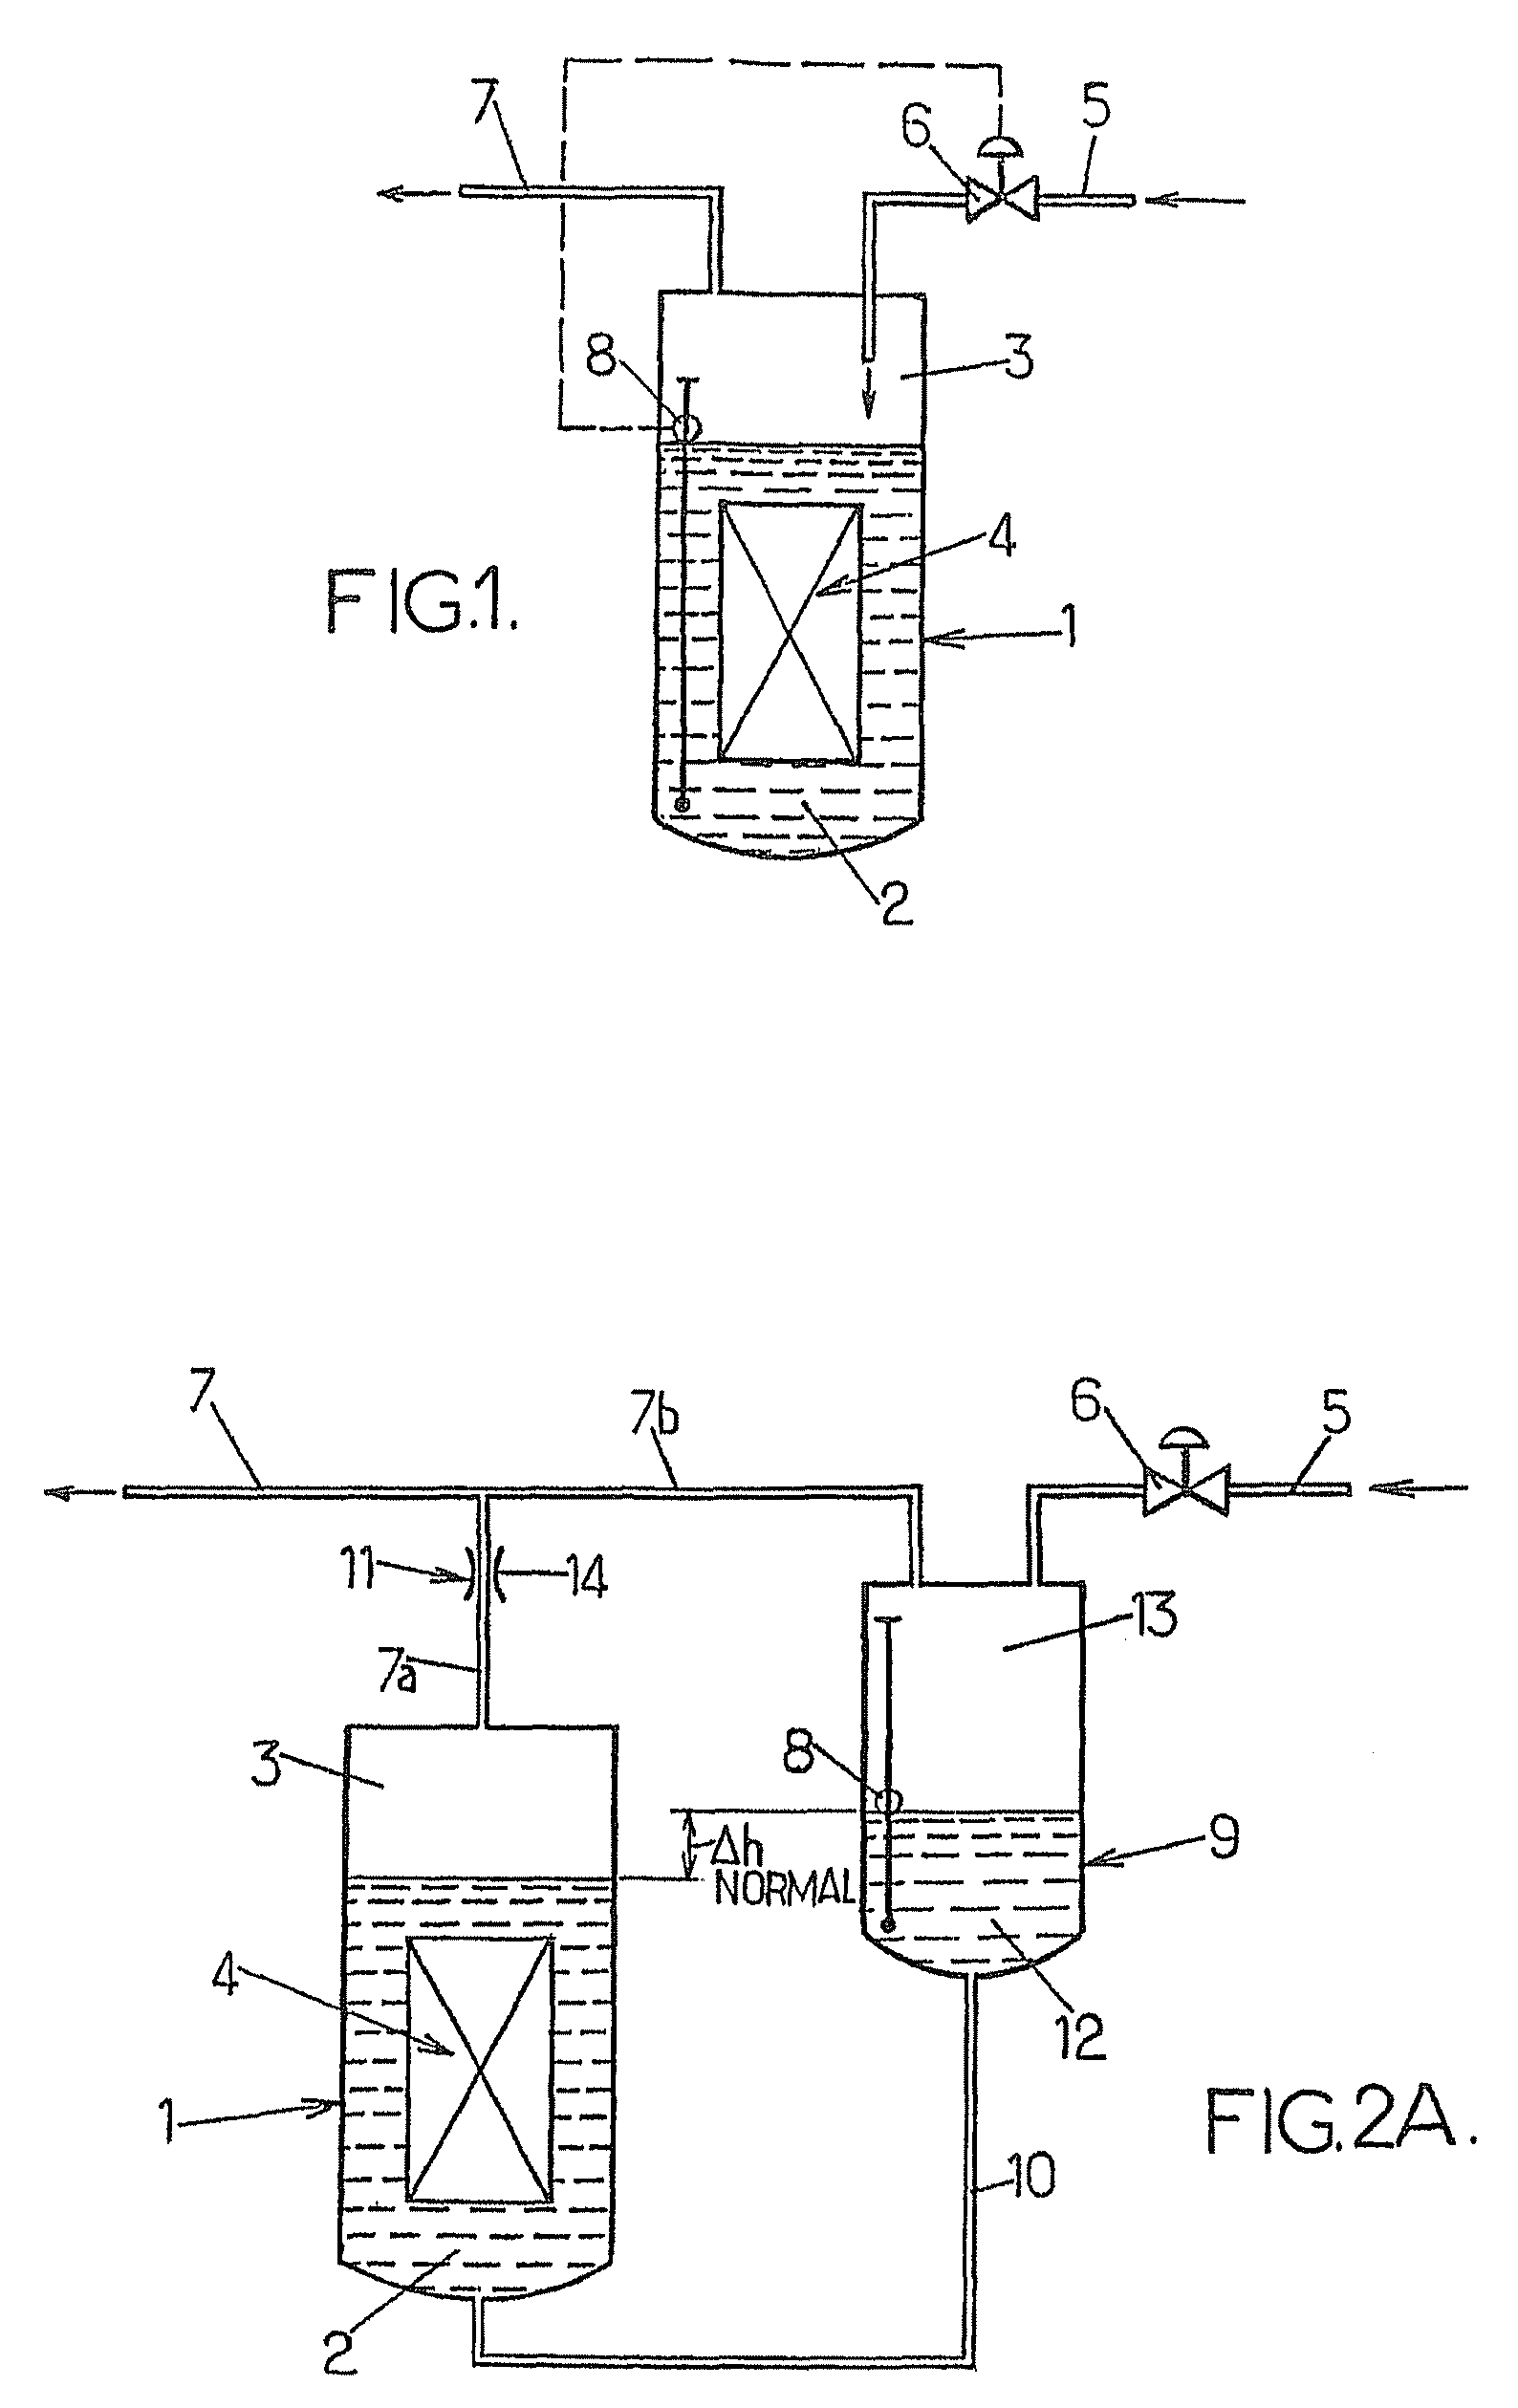 Installation for cryogenic cooling for superconductor device